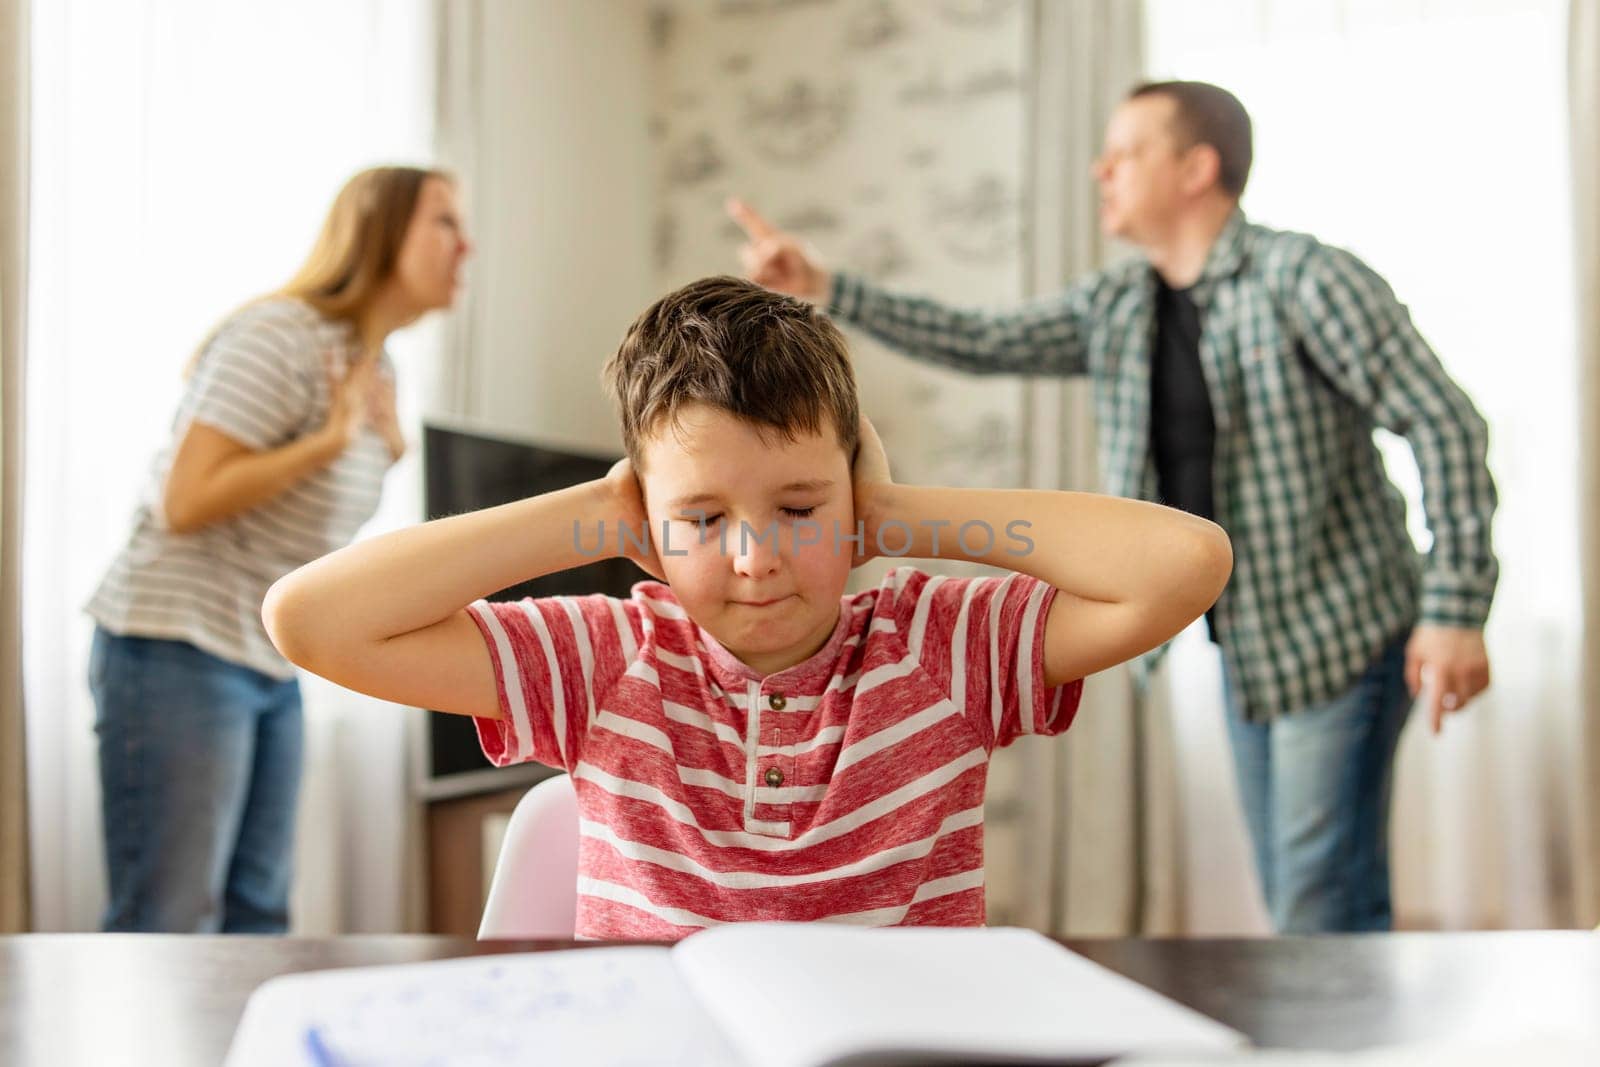 A sad child covers his ears with his hands during an argument between his parents. Family conflicts or divorce impact on on child development